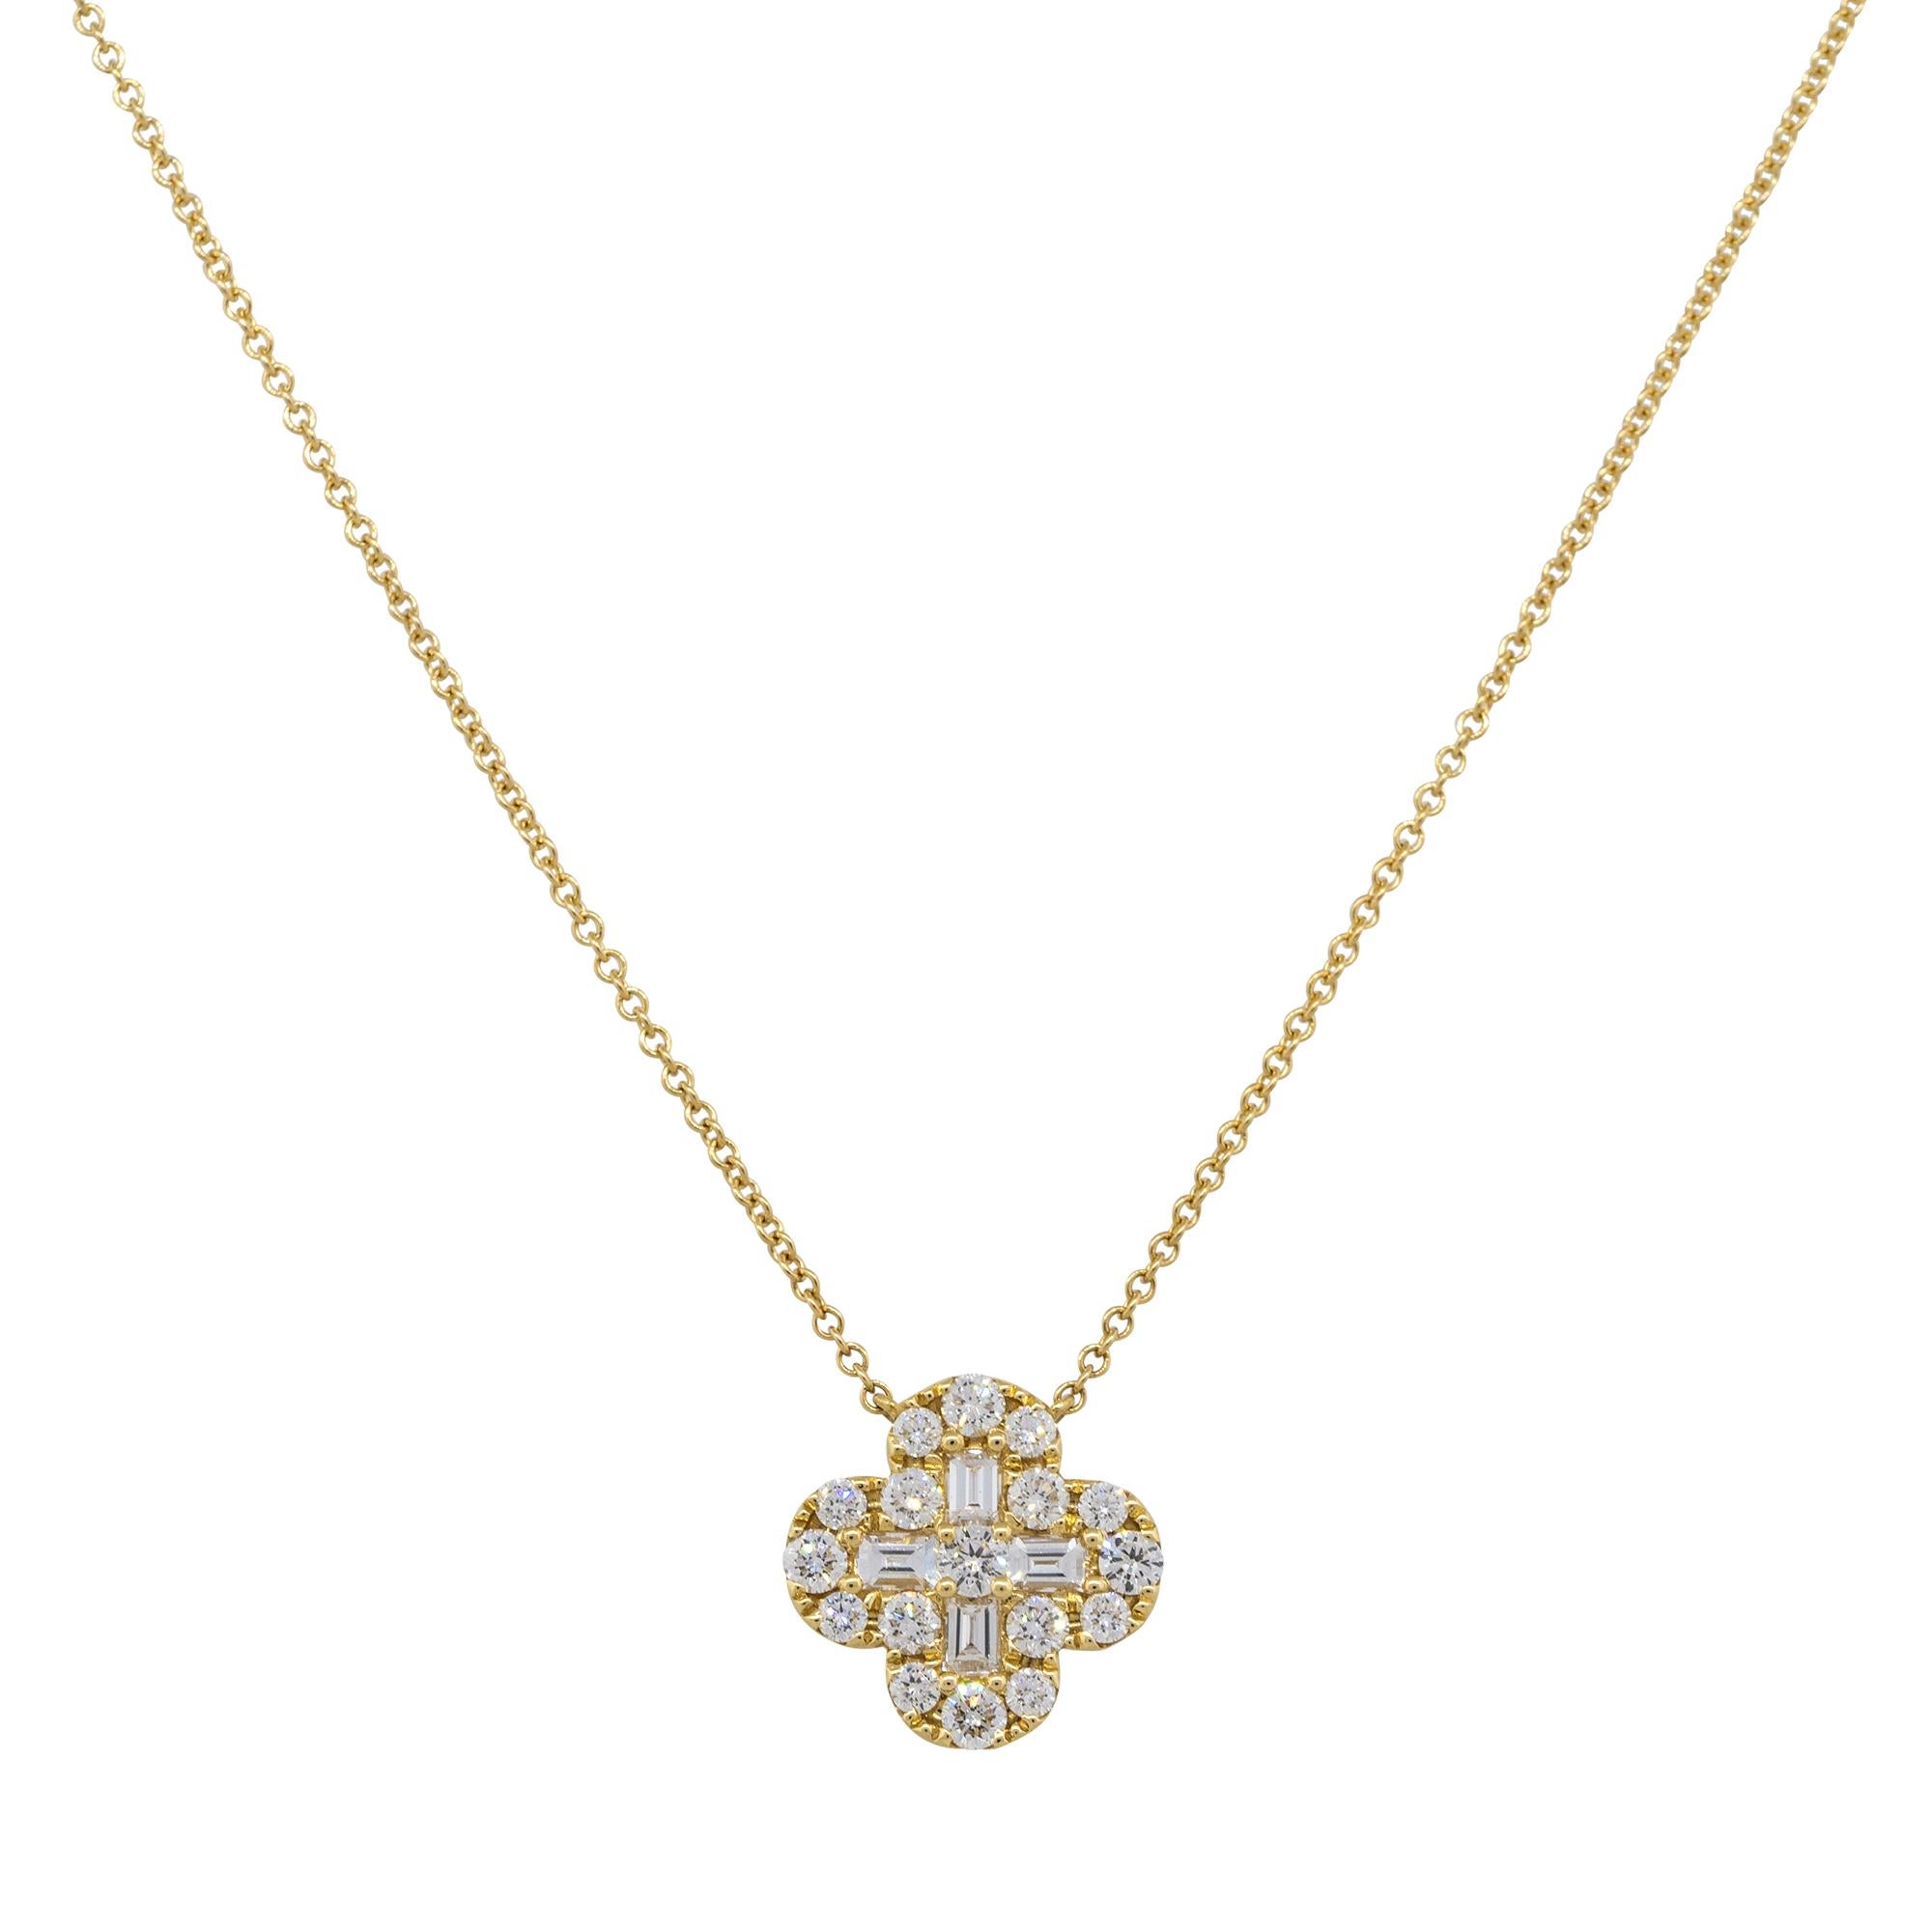 Material: 18k Yellow Gold
Diamond Details: Approx. 0.73ctw of round cut Diamonds. Approx. 0.37ctw of baguette cut Diamonds. Diamonds are G/H in color and VS in clarity
Clasps: Lobster clasp
Total Weight: 4.2g (2.7dwt)
Pendant measurements: 14mm x